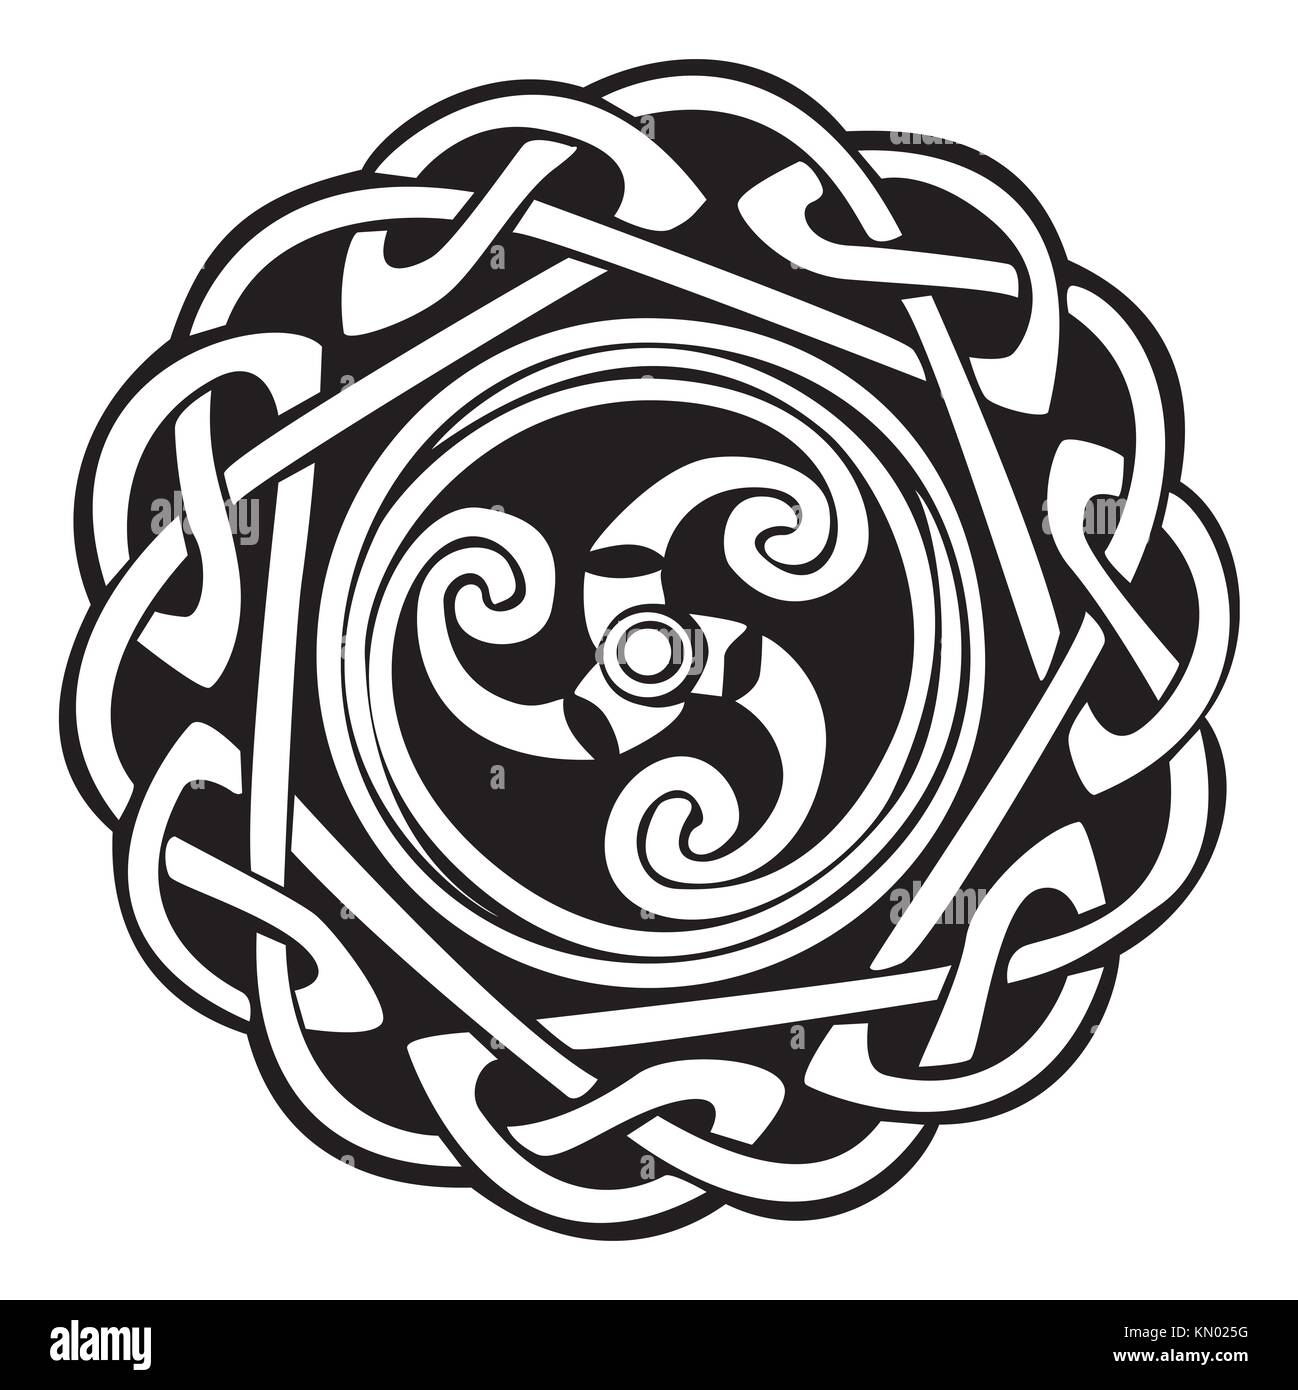 Abstract Celtic design Stock Photo